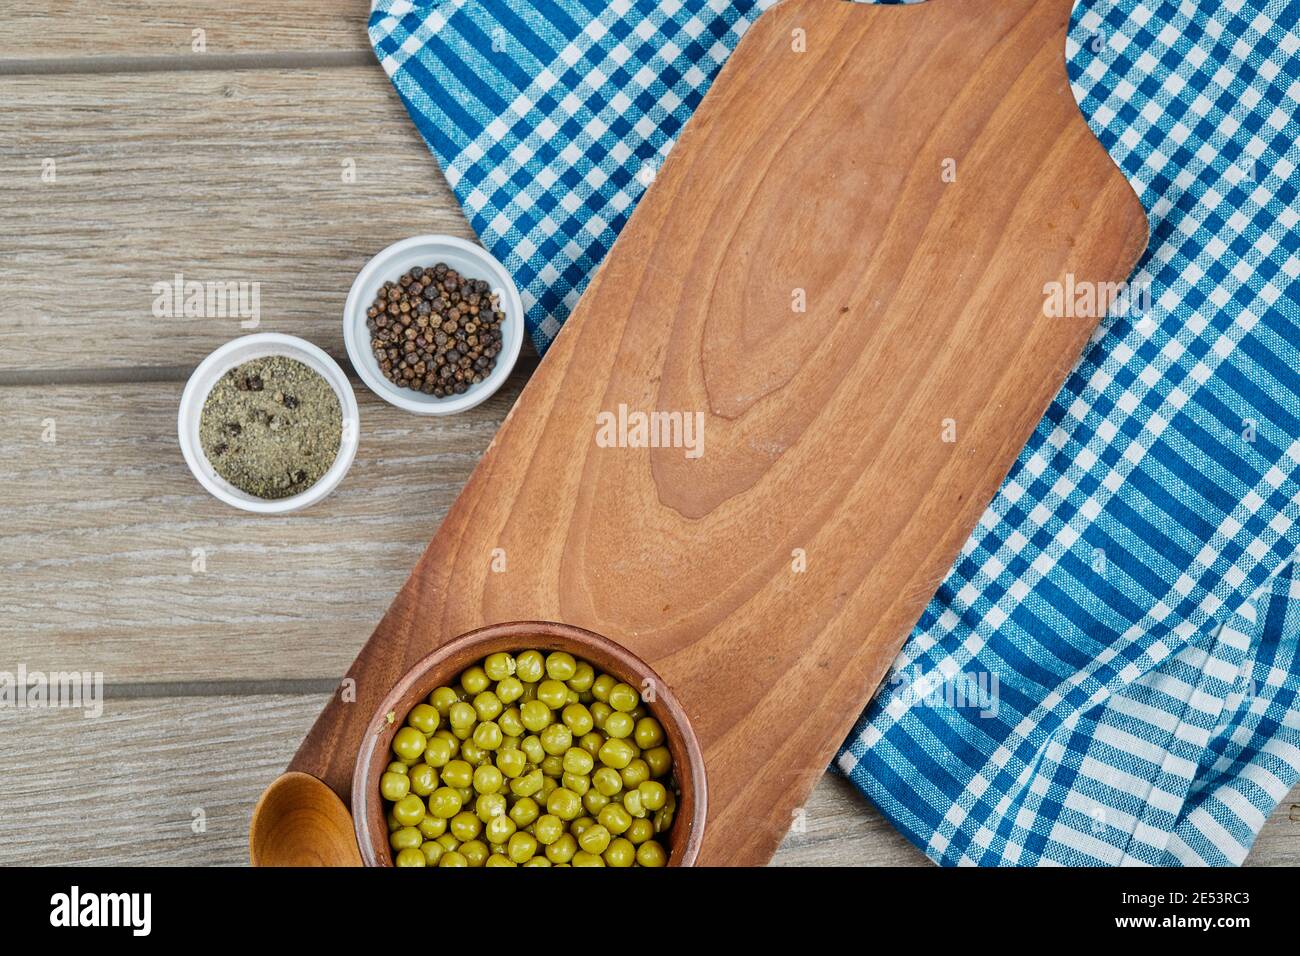 https://c8.alamy.com/comp/2E53RC3/a-bowl-of-boiled-green-peas-with-a-spoon-spices-and-a-blue-tablecloth-on-a-wooden-table-2E53RC3.jpg